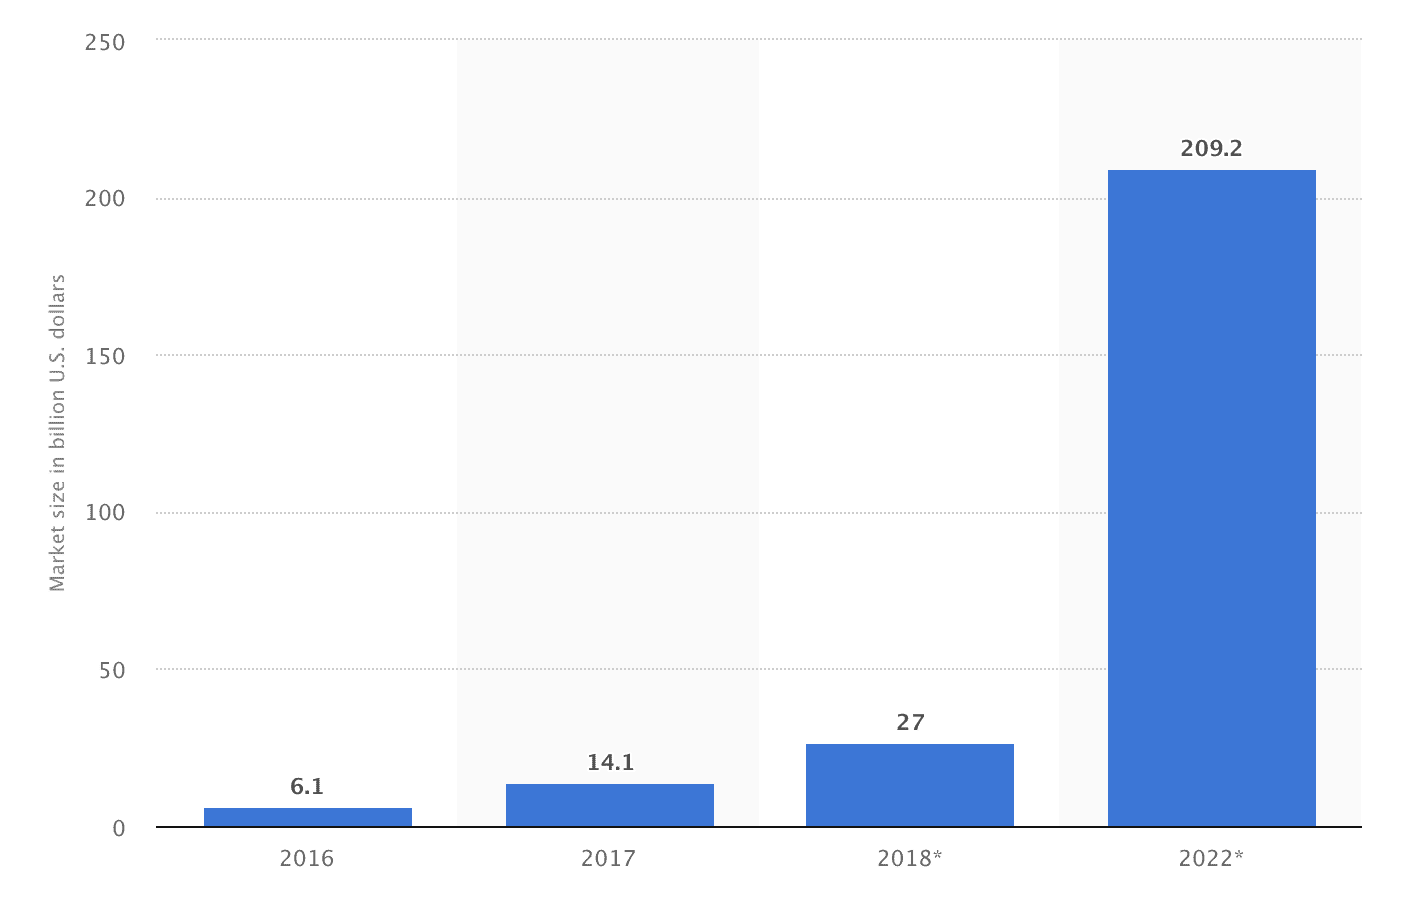 bar graph displaying value of VR